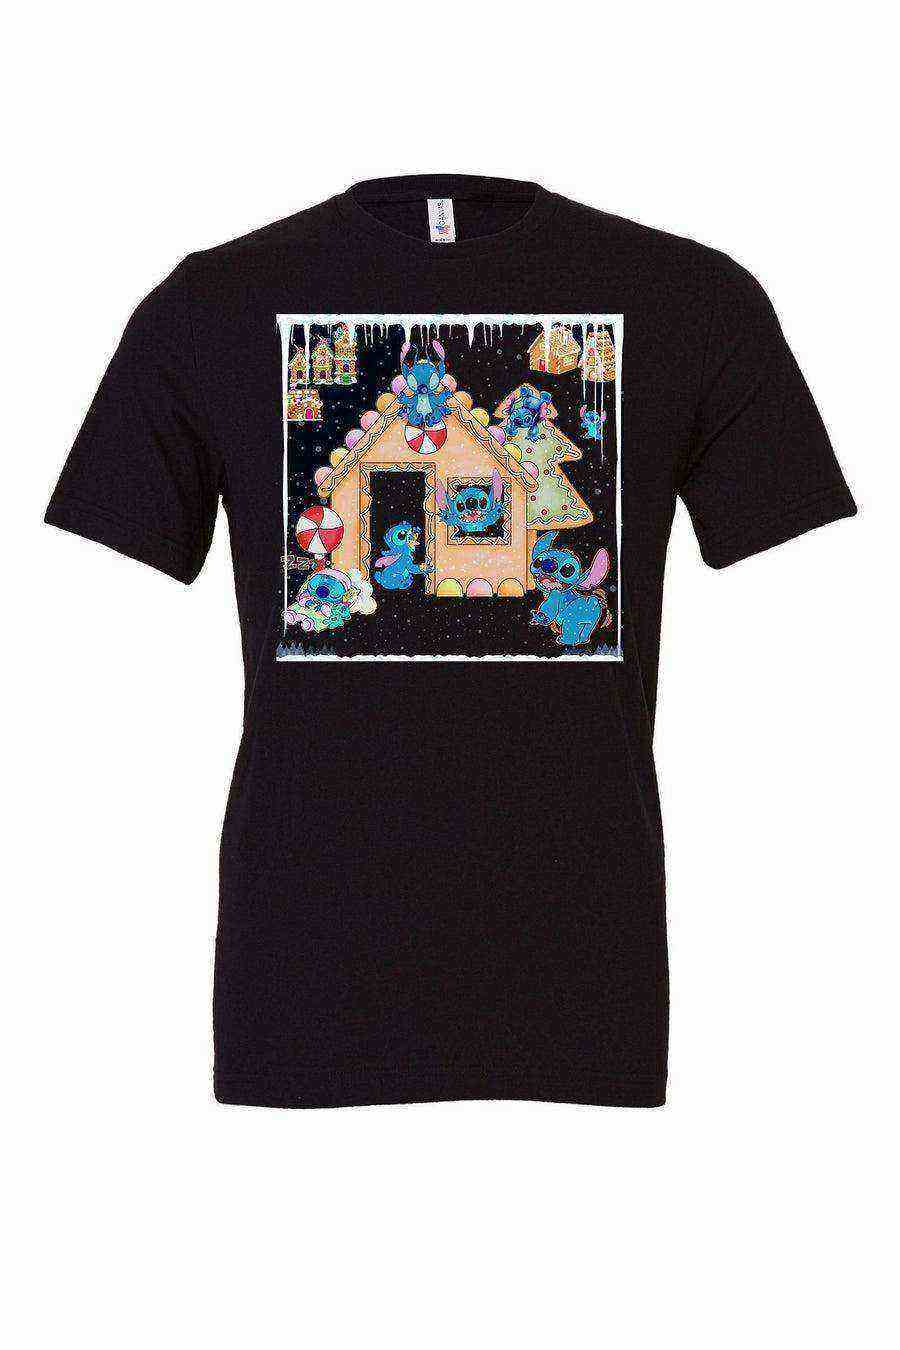 Stitch Finds A Gingerbread House Shirt | Stitch Christmas Shirt - Dylan's Tees